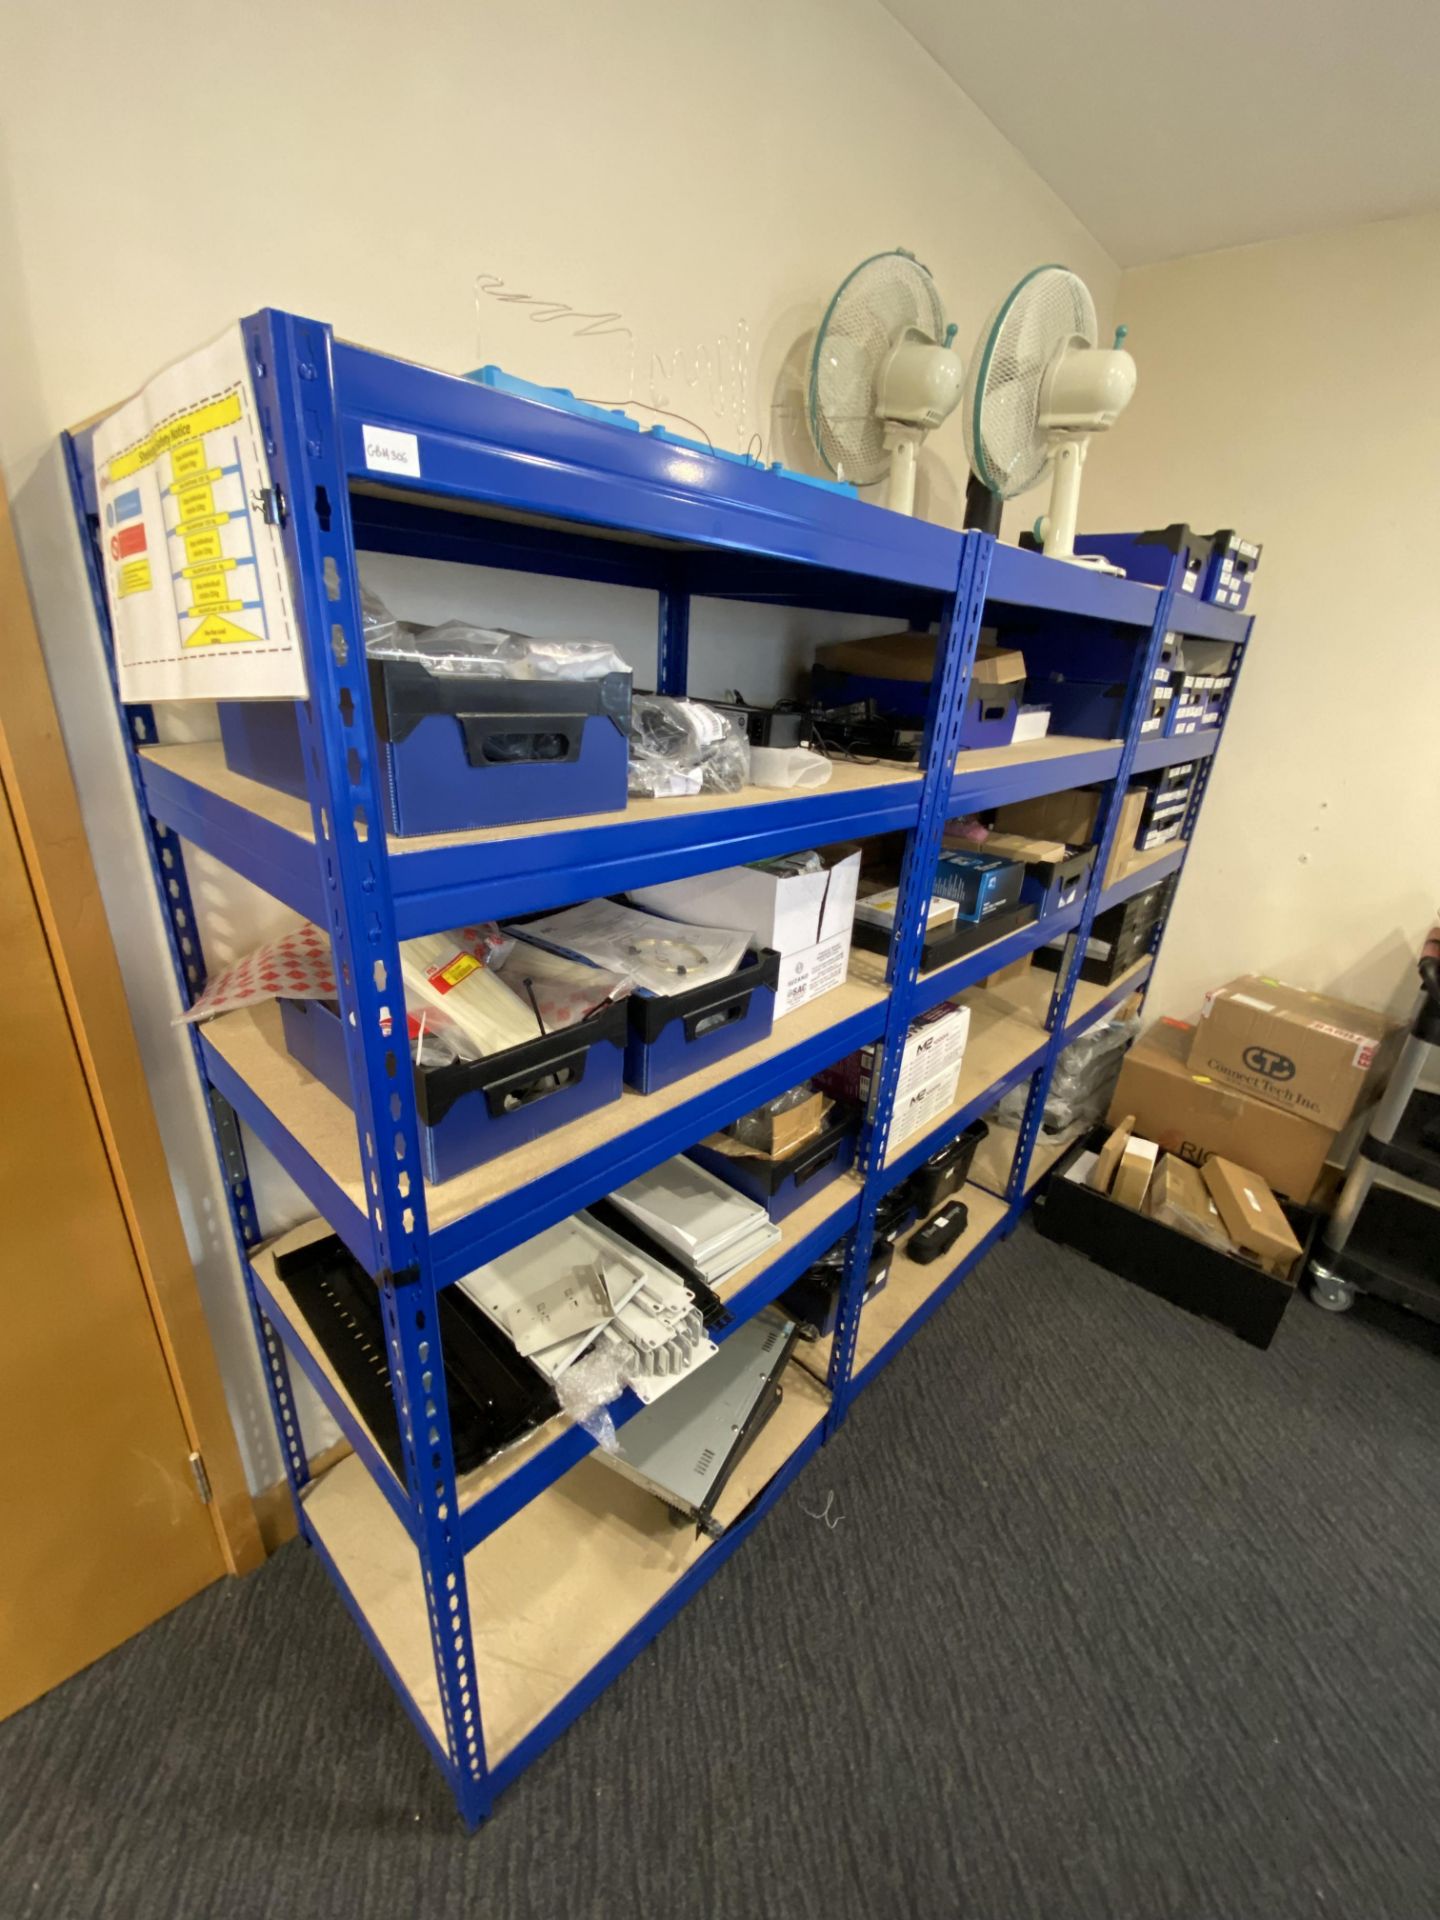 The Entire Server Room Shelving Comprising 7x Bays of Light Duty Boltless Racking + 2x Further